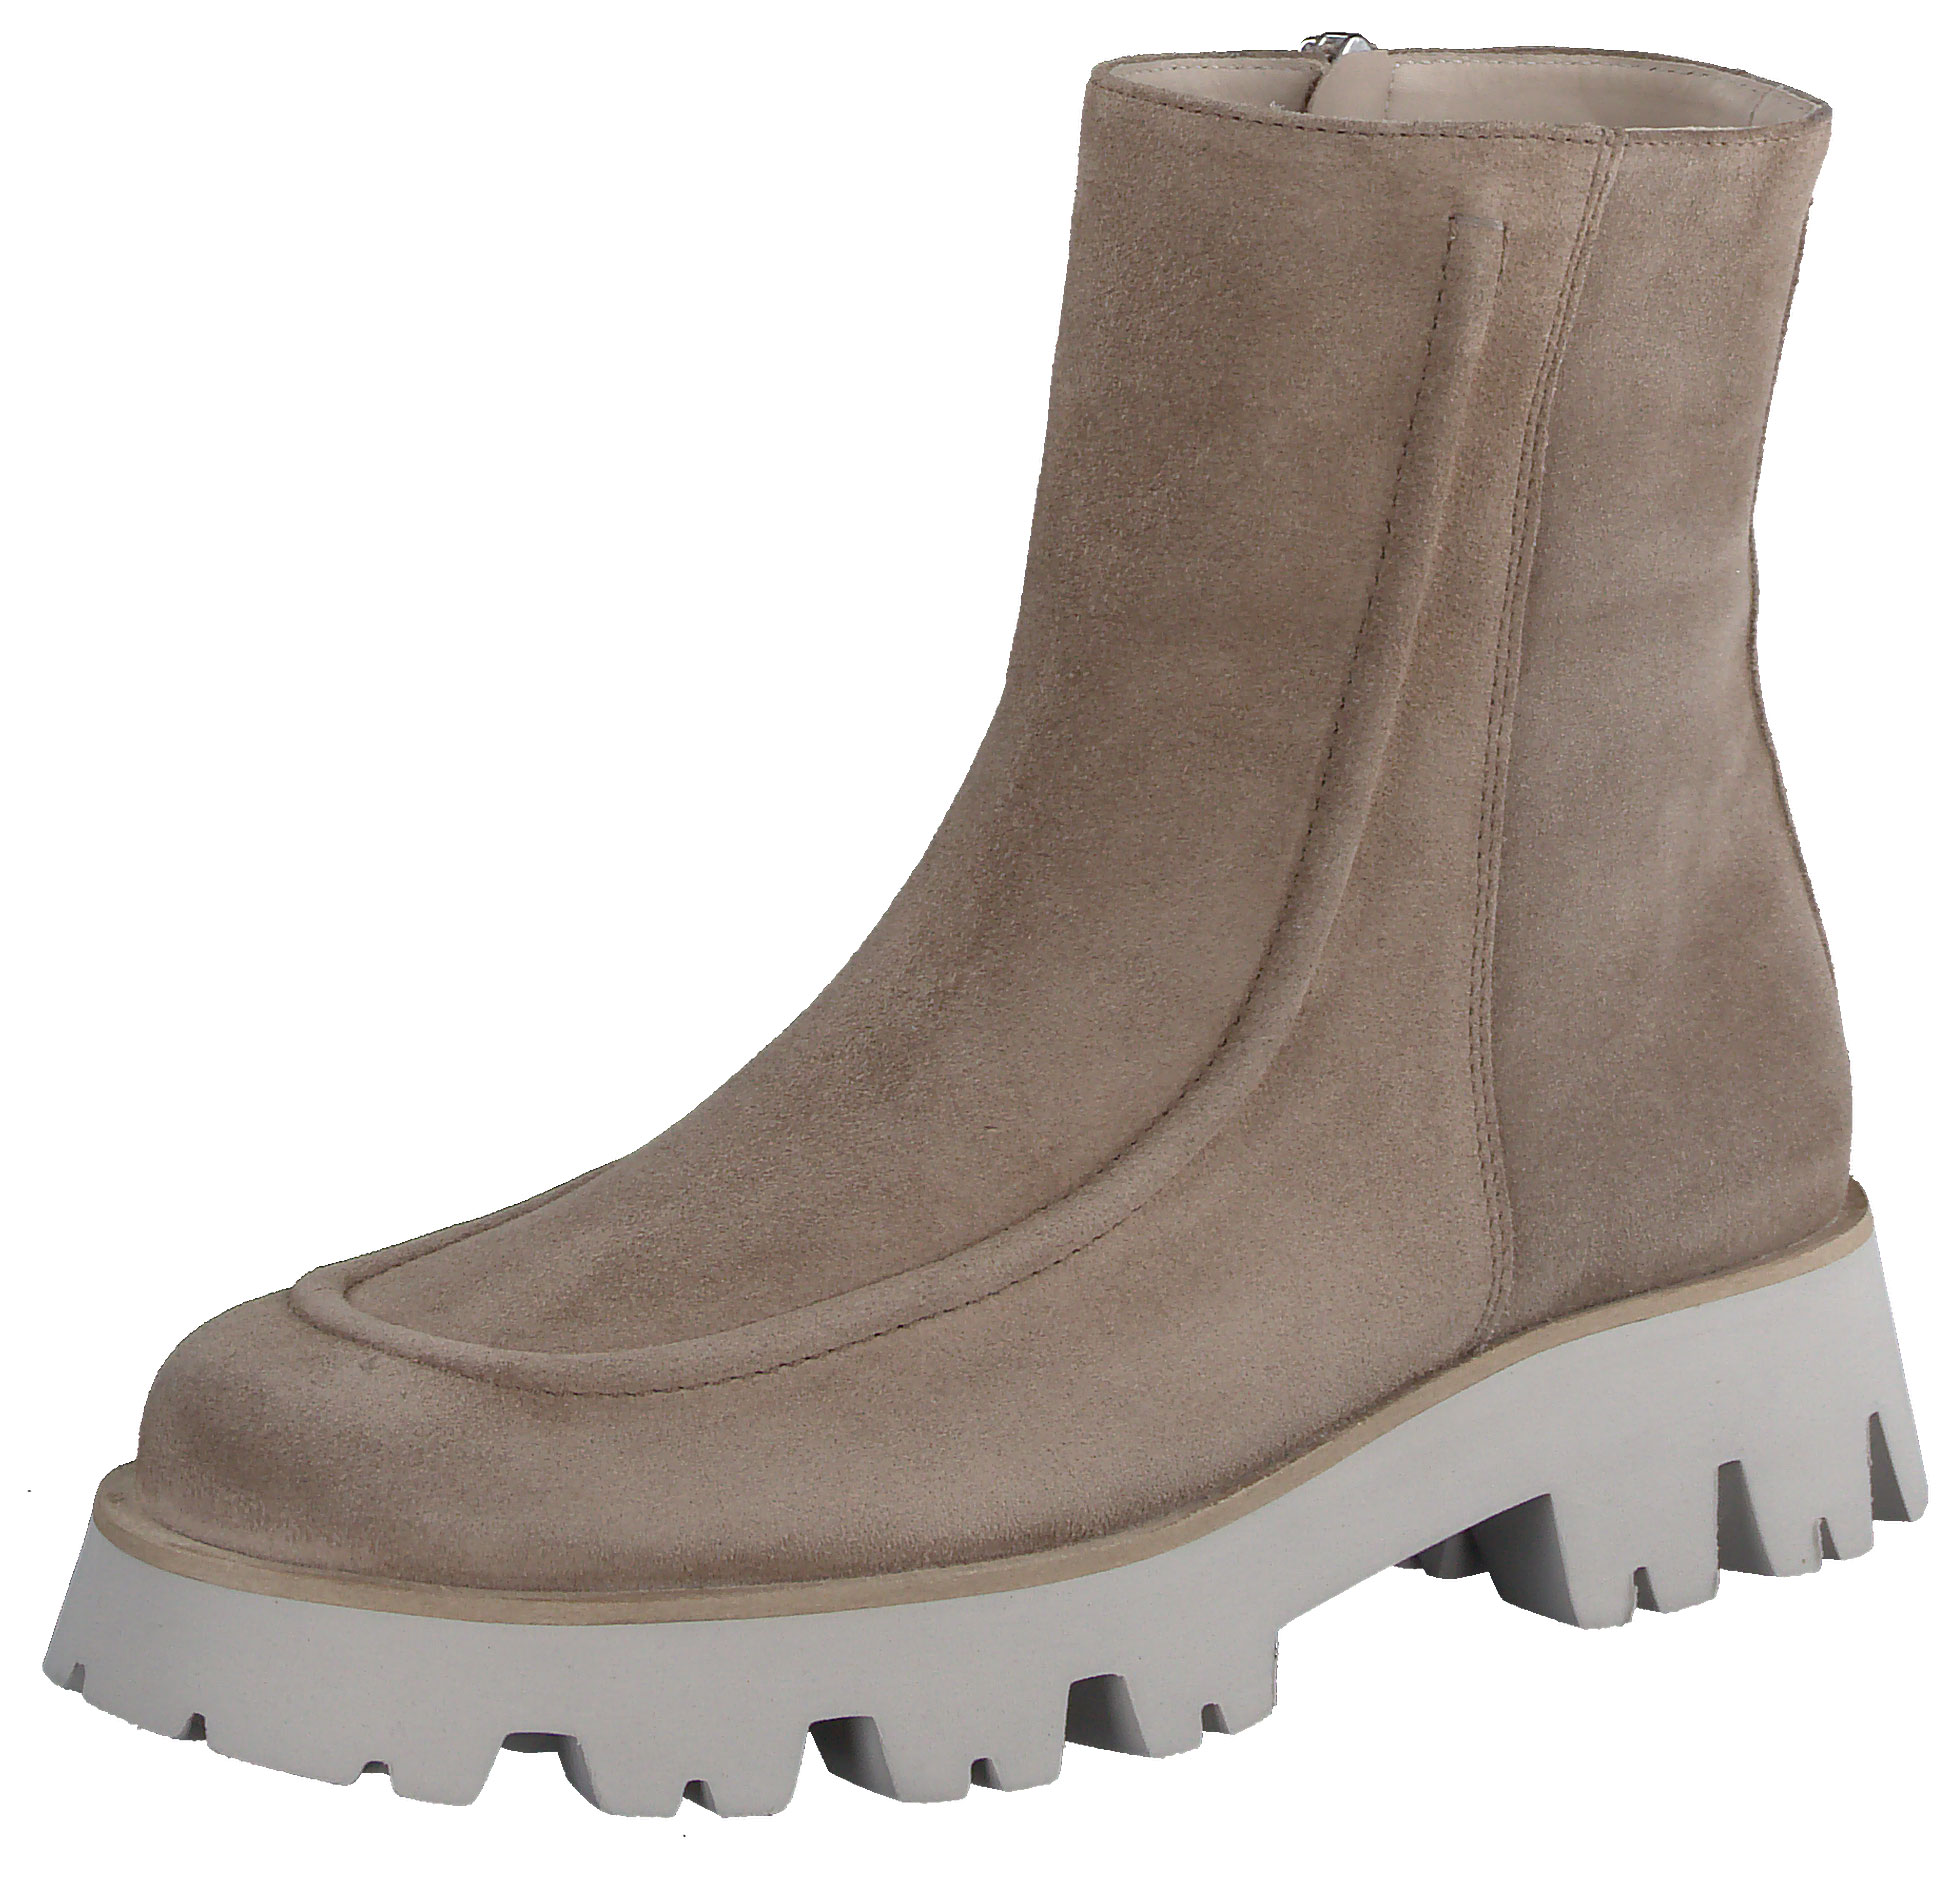 Stiefelette - Brown suede leather